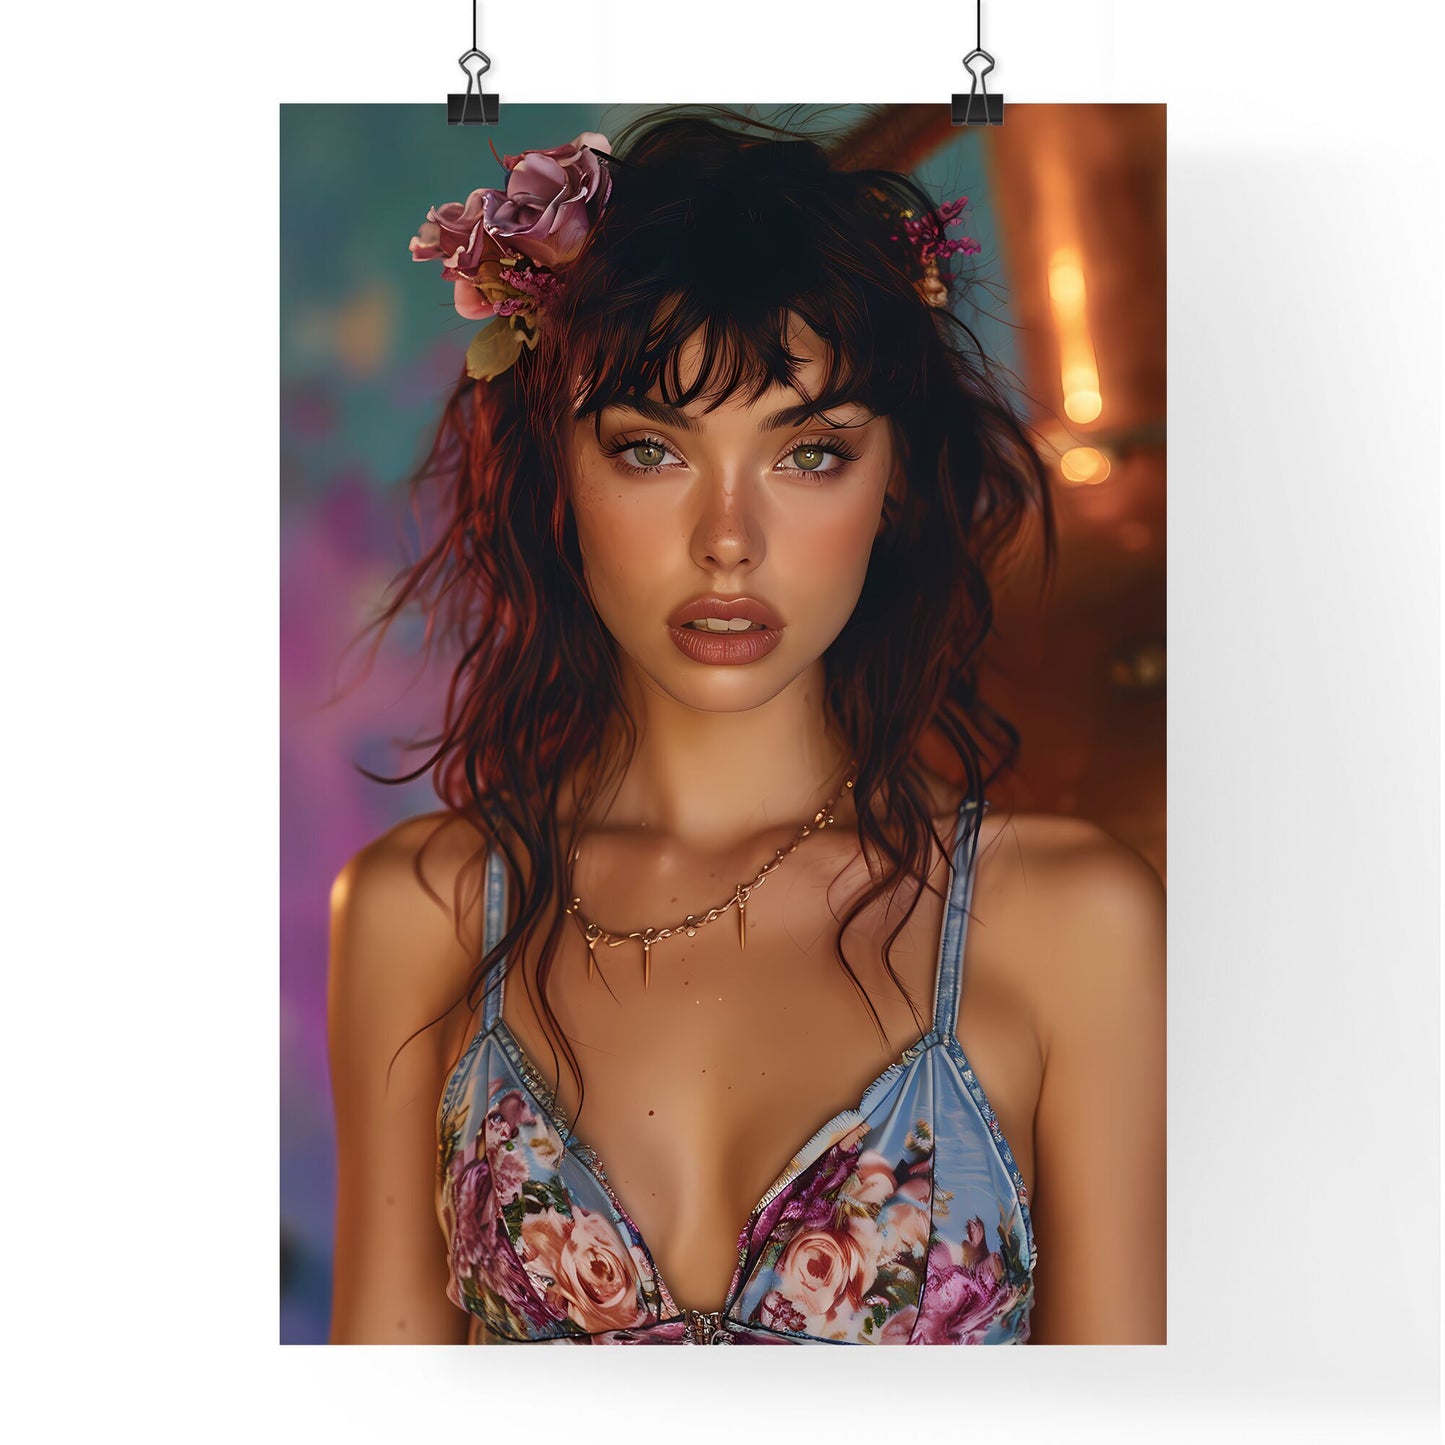 50s pin up girl sitting on top of a copper still wearing a short halter top and denim shorts - Art print of a woman with flowers in her hair Default Title